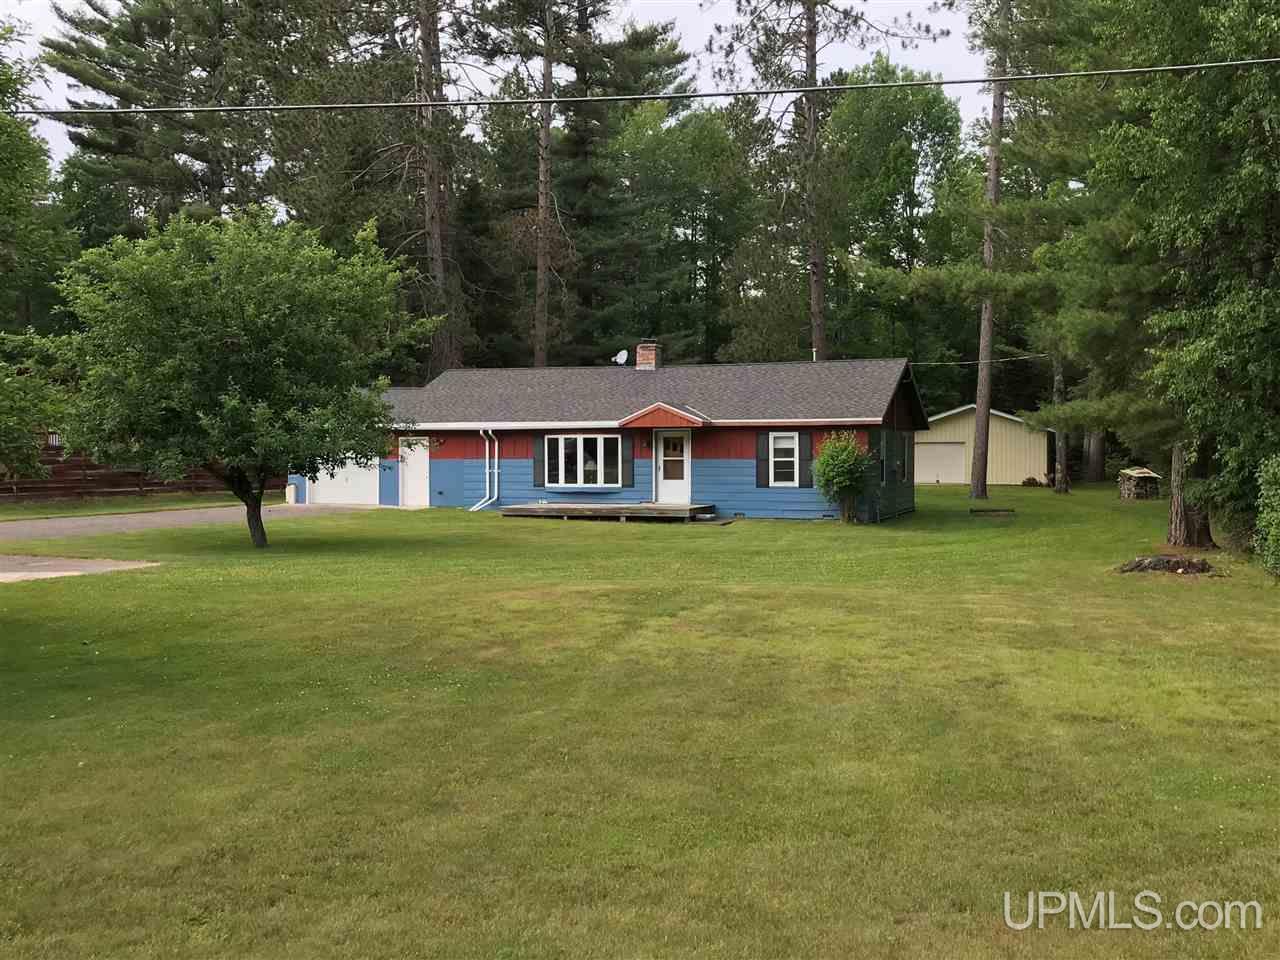 This recently updated 3 bedroom home sits nicely nestled among some large pines.  Home features, newer windows, large living room with a wood fireplace insert and nice pole barn in the back yard.  Minutes to Florence and located on the snowmobile and ATV trail.  This would be a great home, recreational property or rental property.